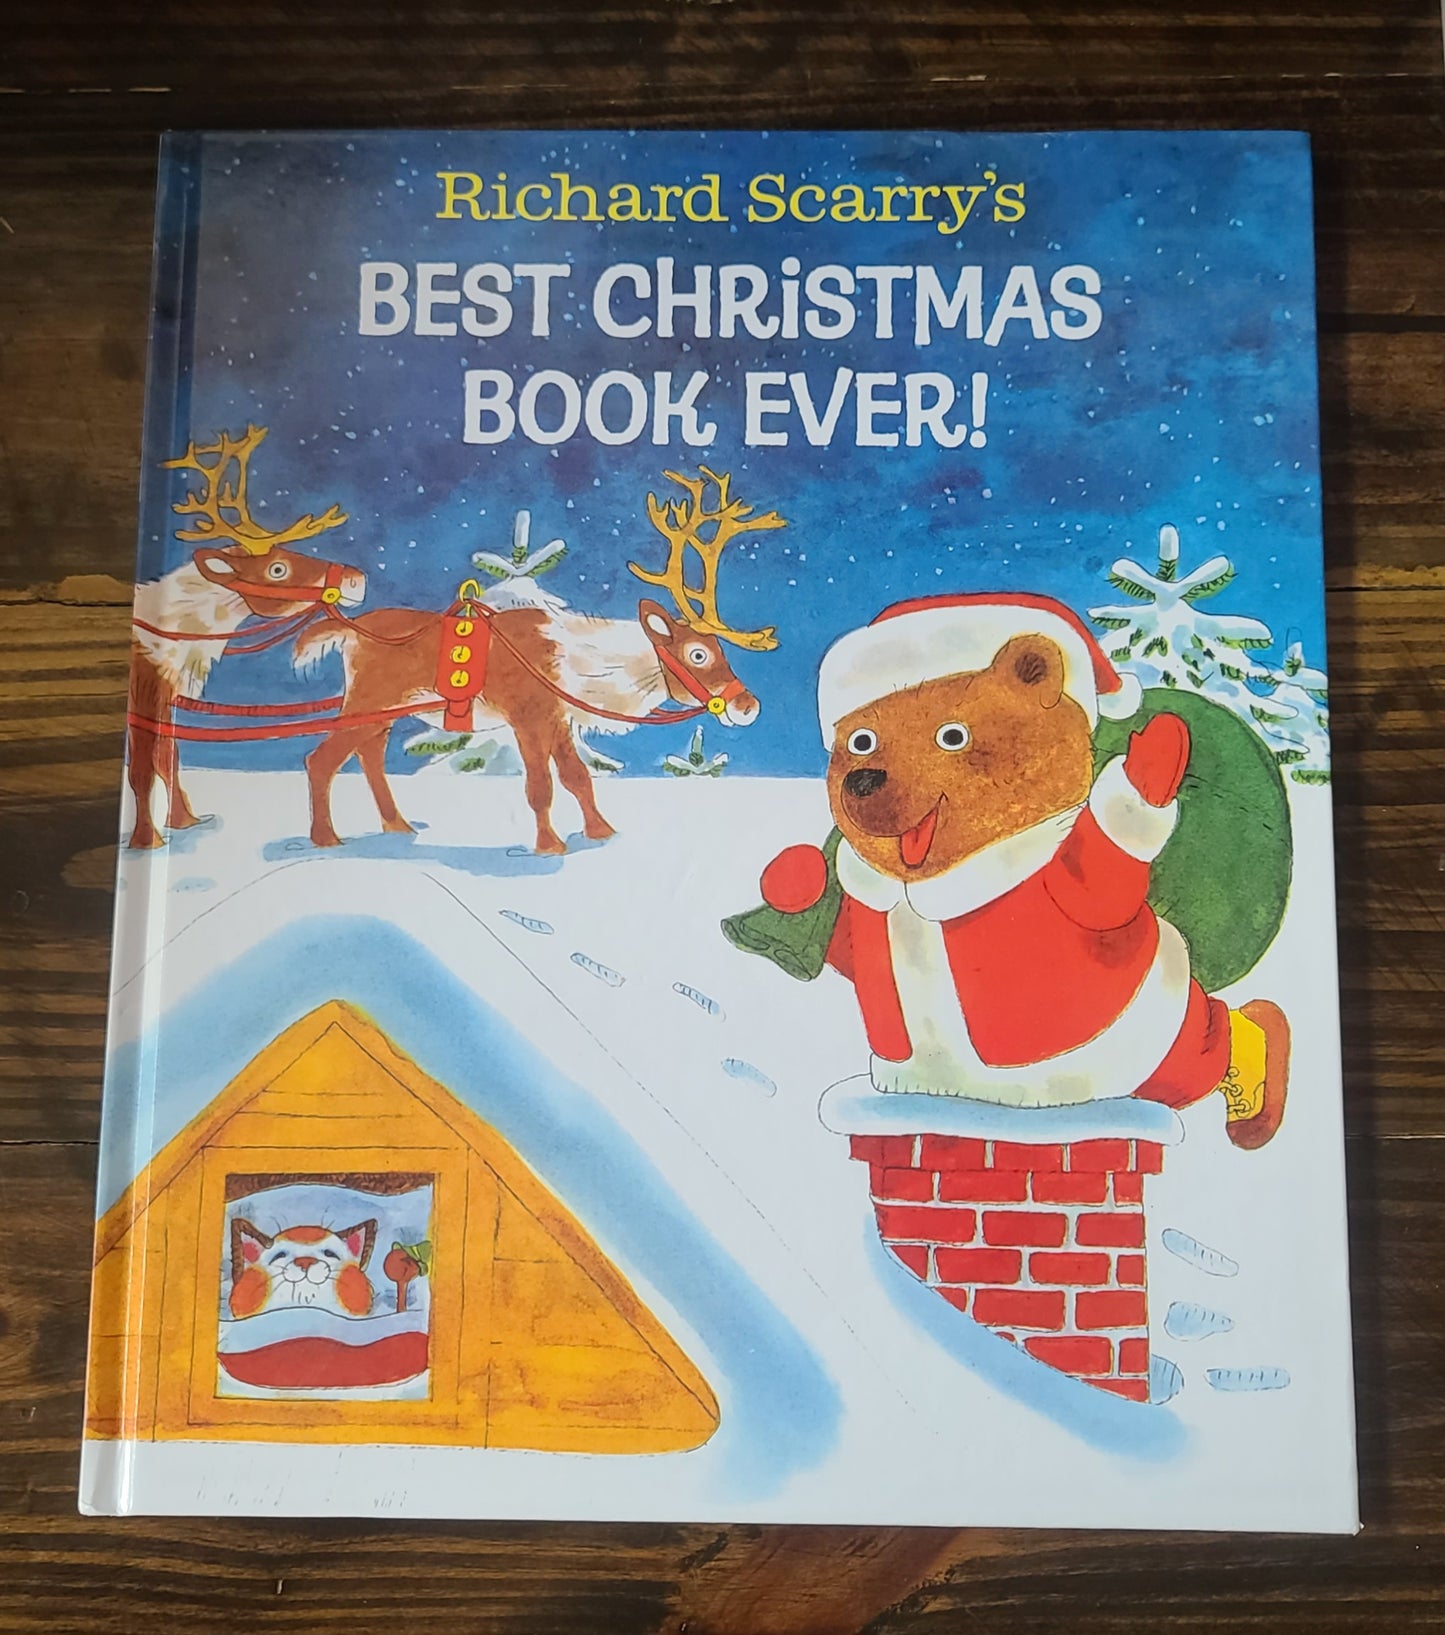 Richard Scarry's "Best Christmas Ever" Book